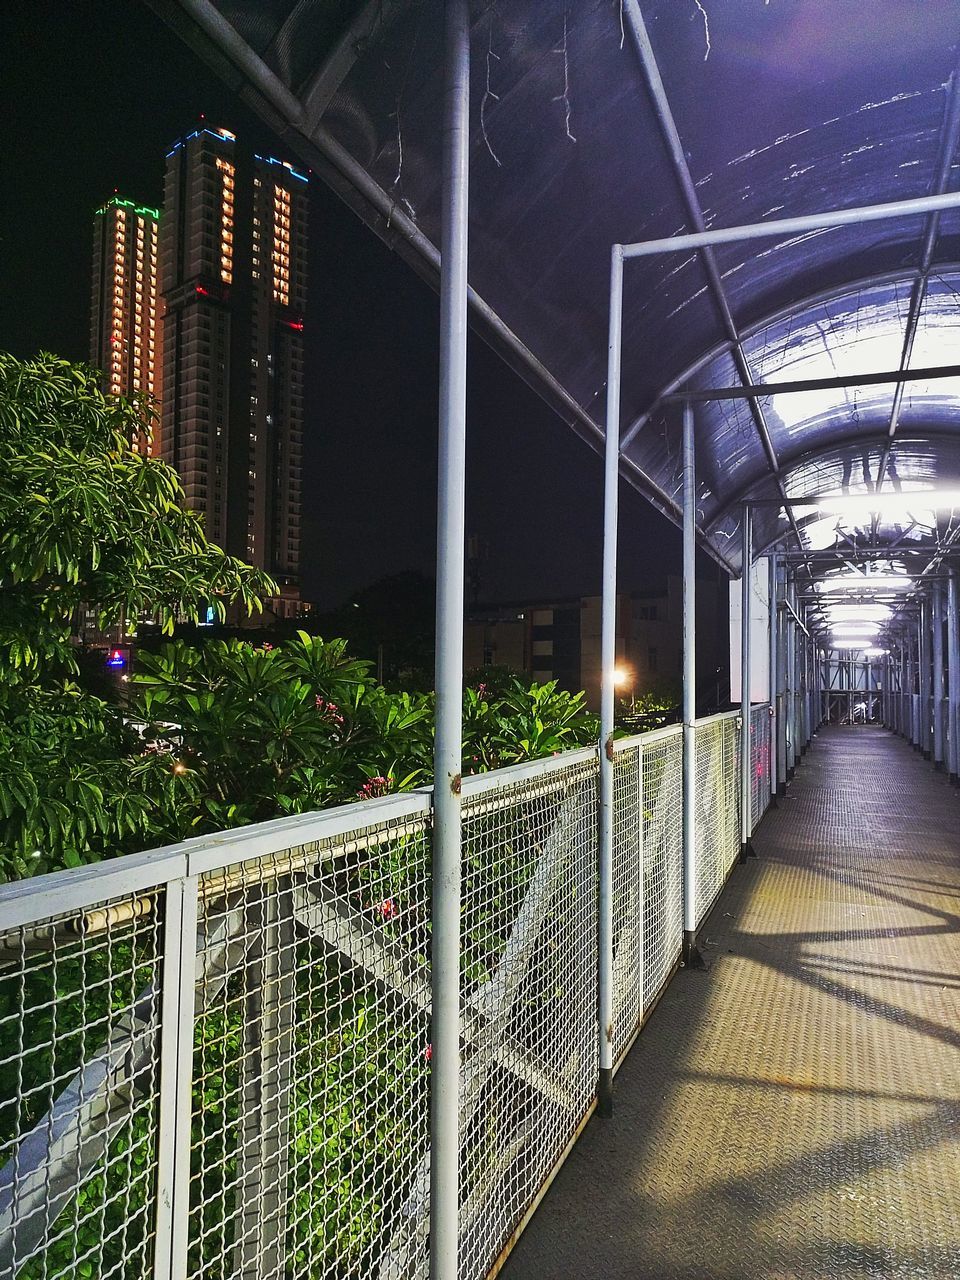 architecture, built structure, city, building, building exterior, illuminated, night, no people, nature, plant, urban area, railing, outdoors, footpath, lighting equipment, transportation, office building exterior, the way forward